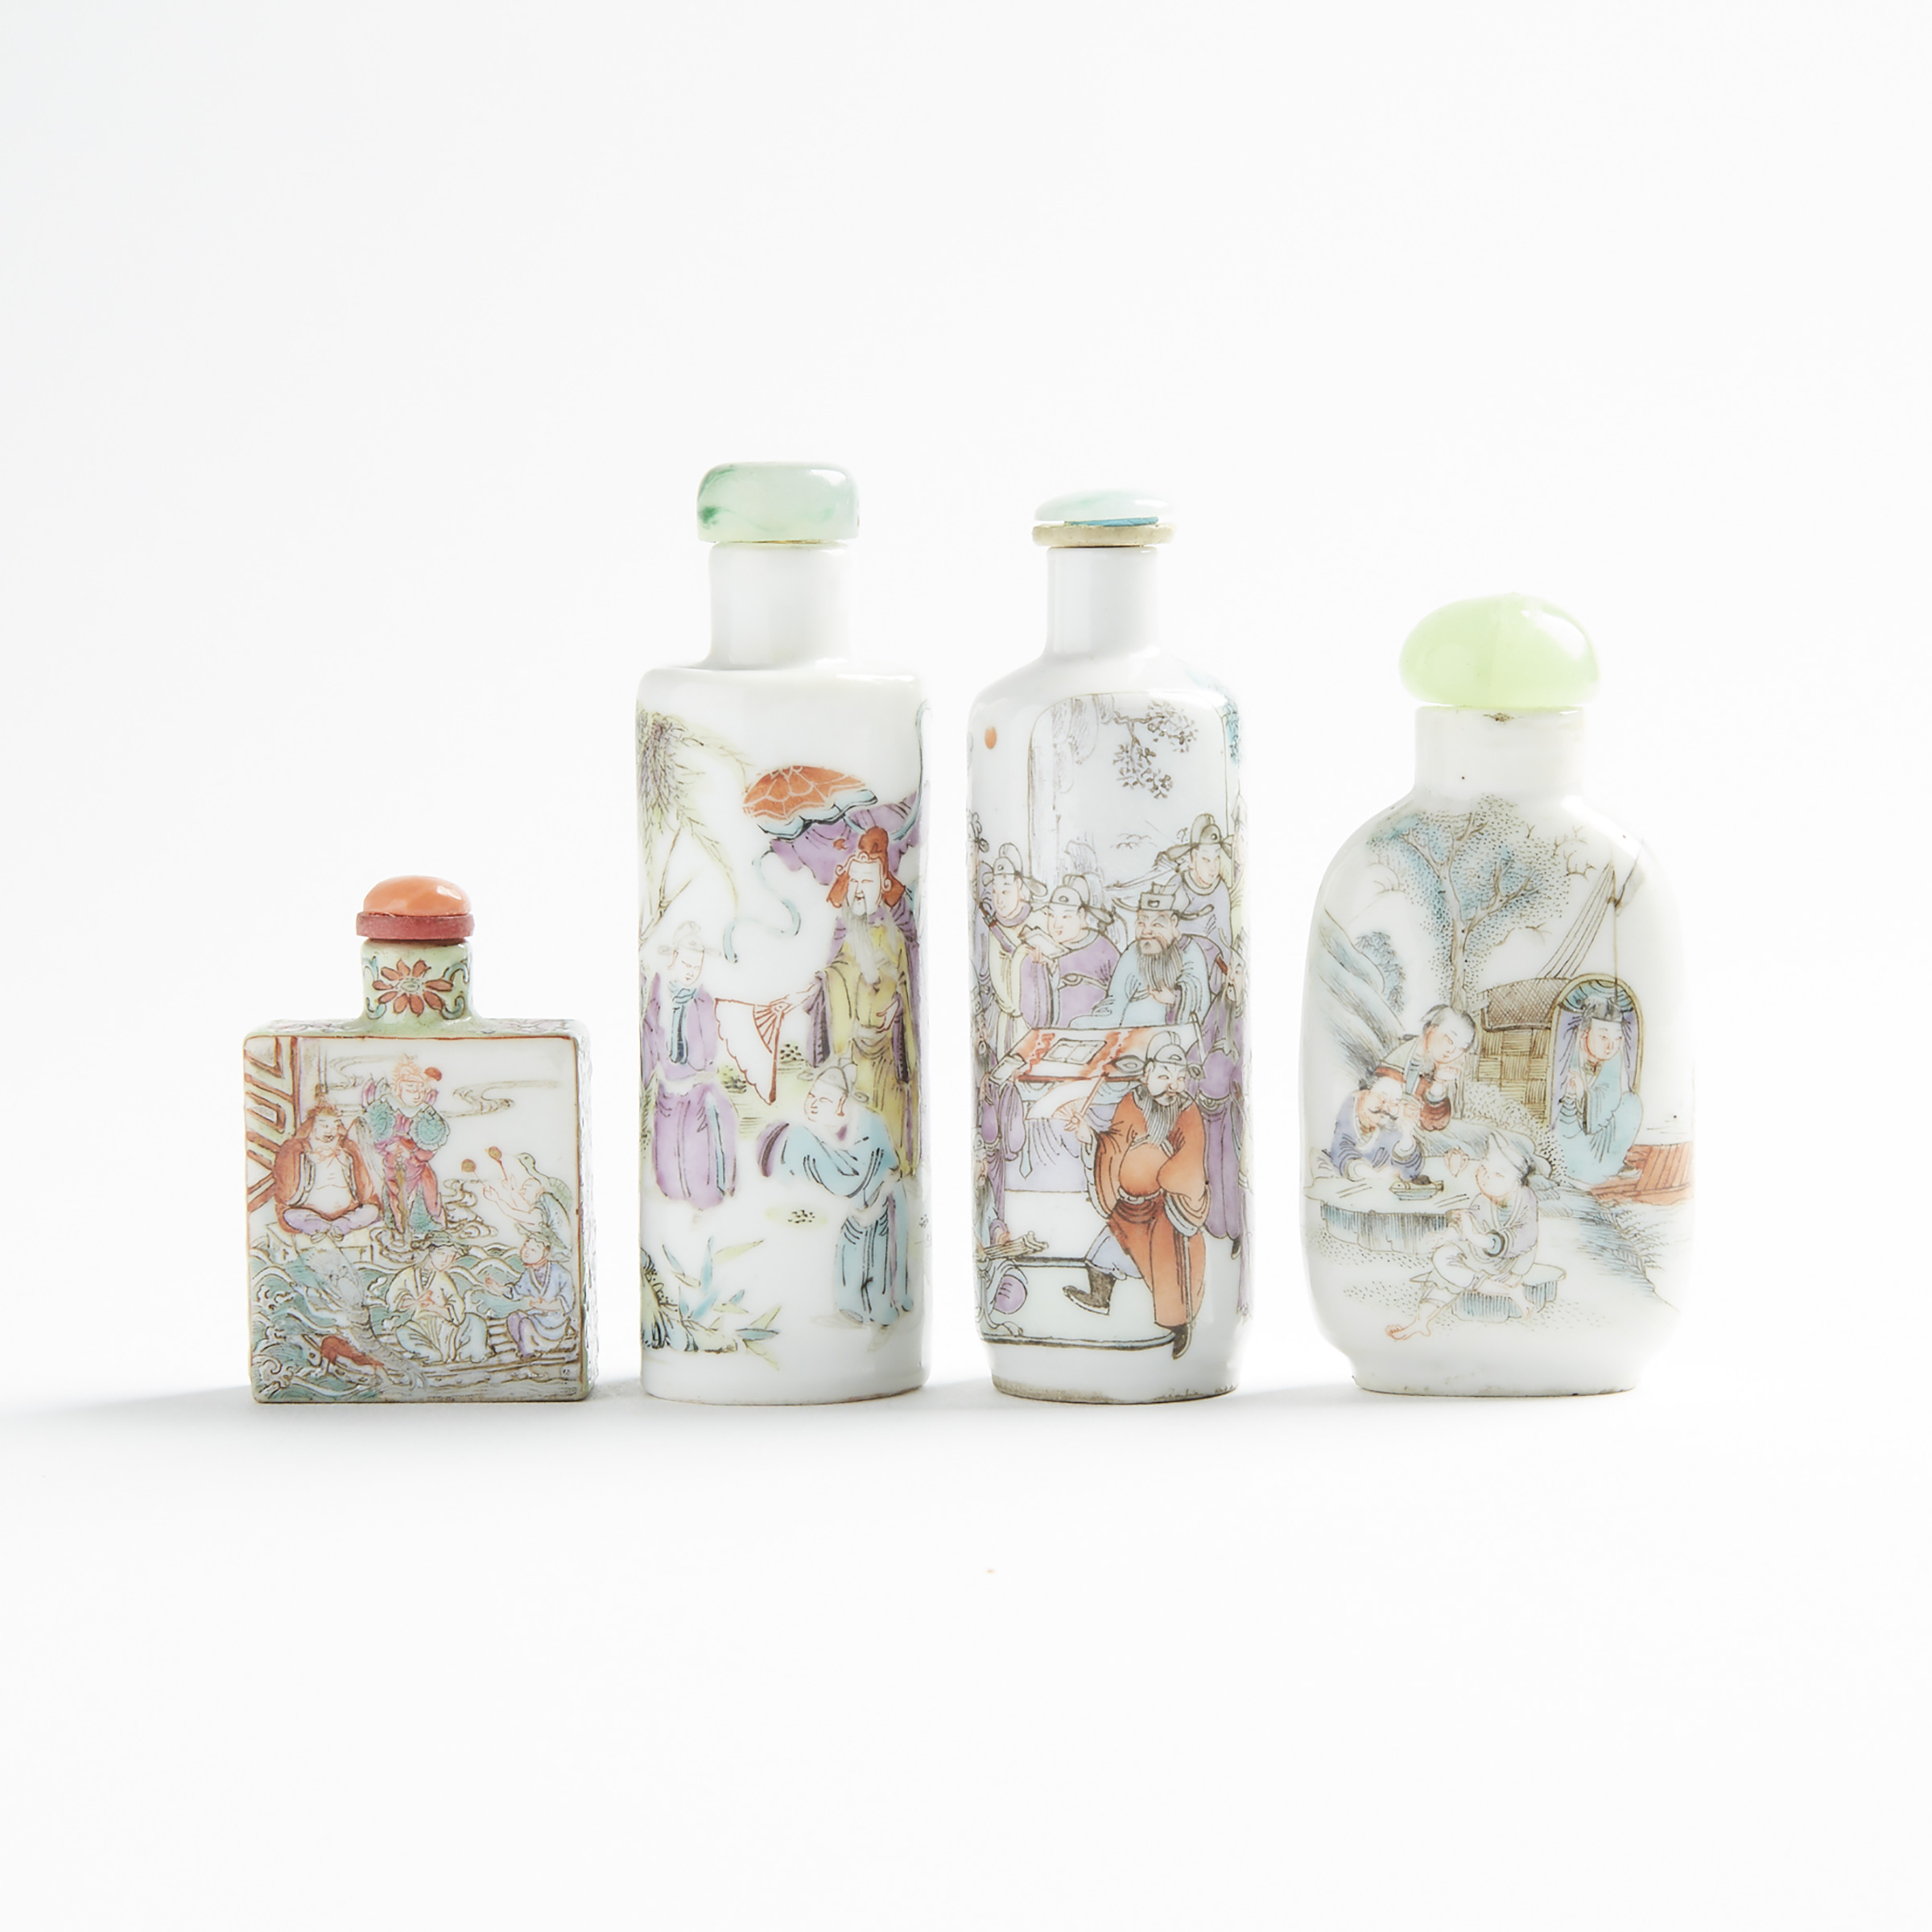 A Group of Four Famille Rose Porcelain Snuff Bottles, 19th Century